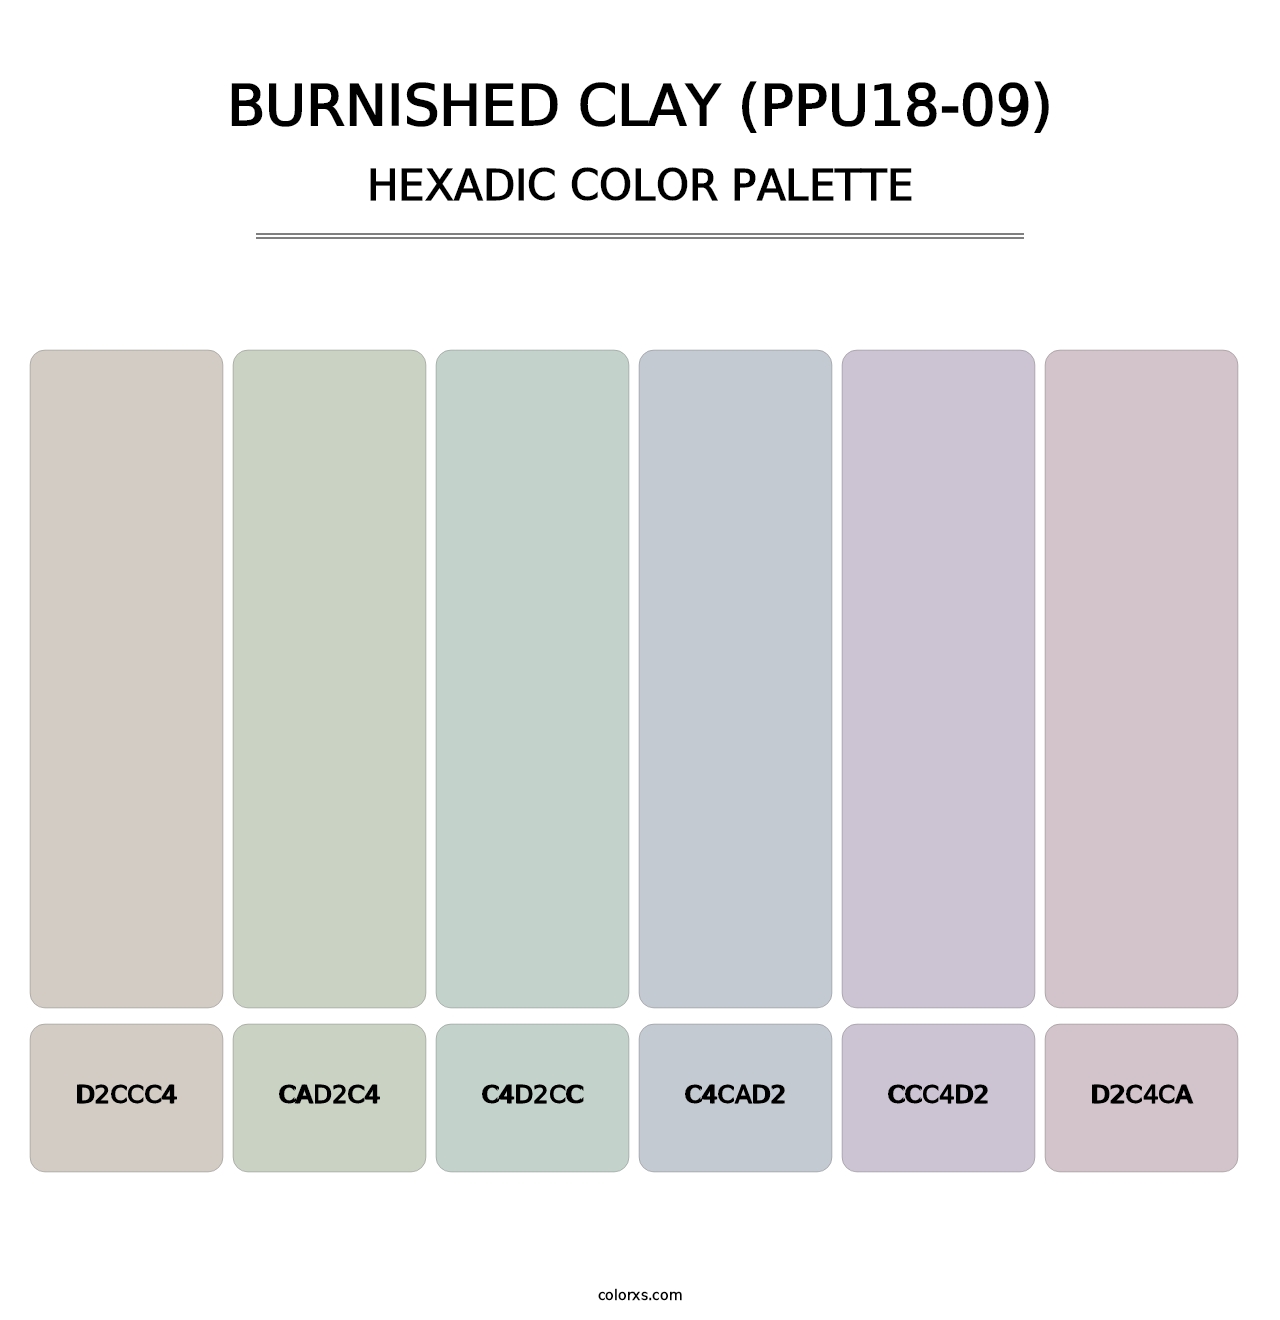 Burnished Clay (PPU18-09) - Hexadic Color Palette